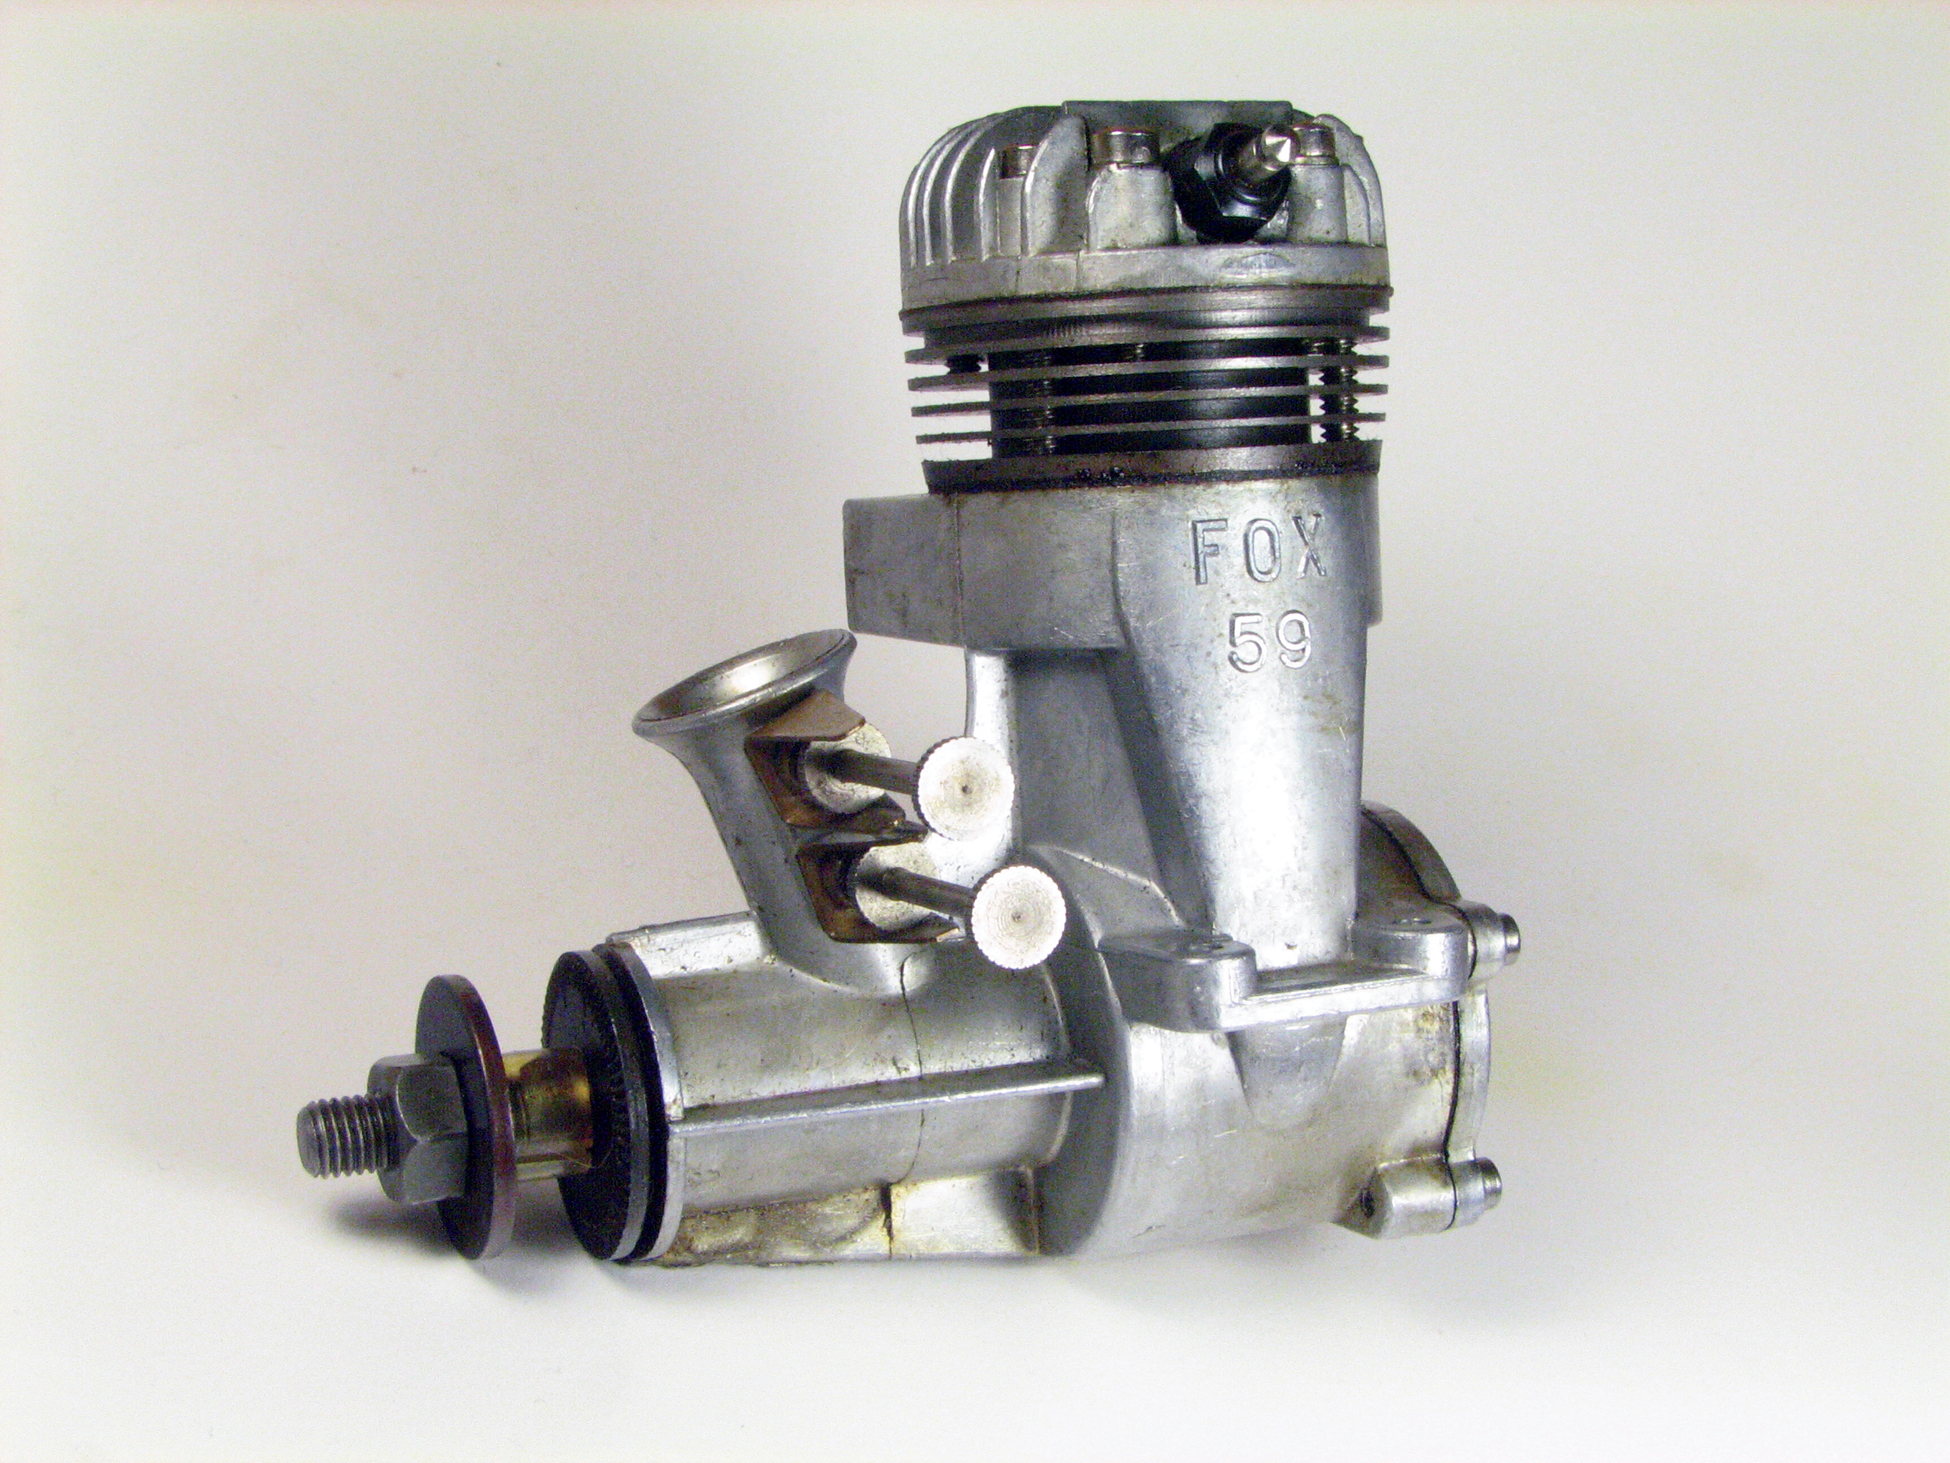  The 1954 Fox .59 cid two-speed with two needle-valve assemblies for high and low speed control.